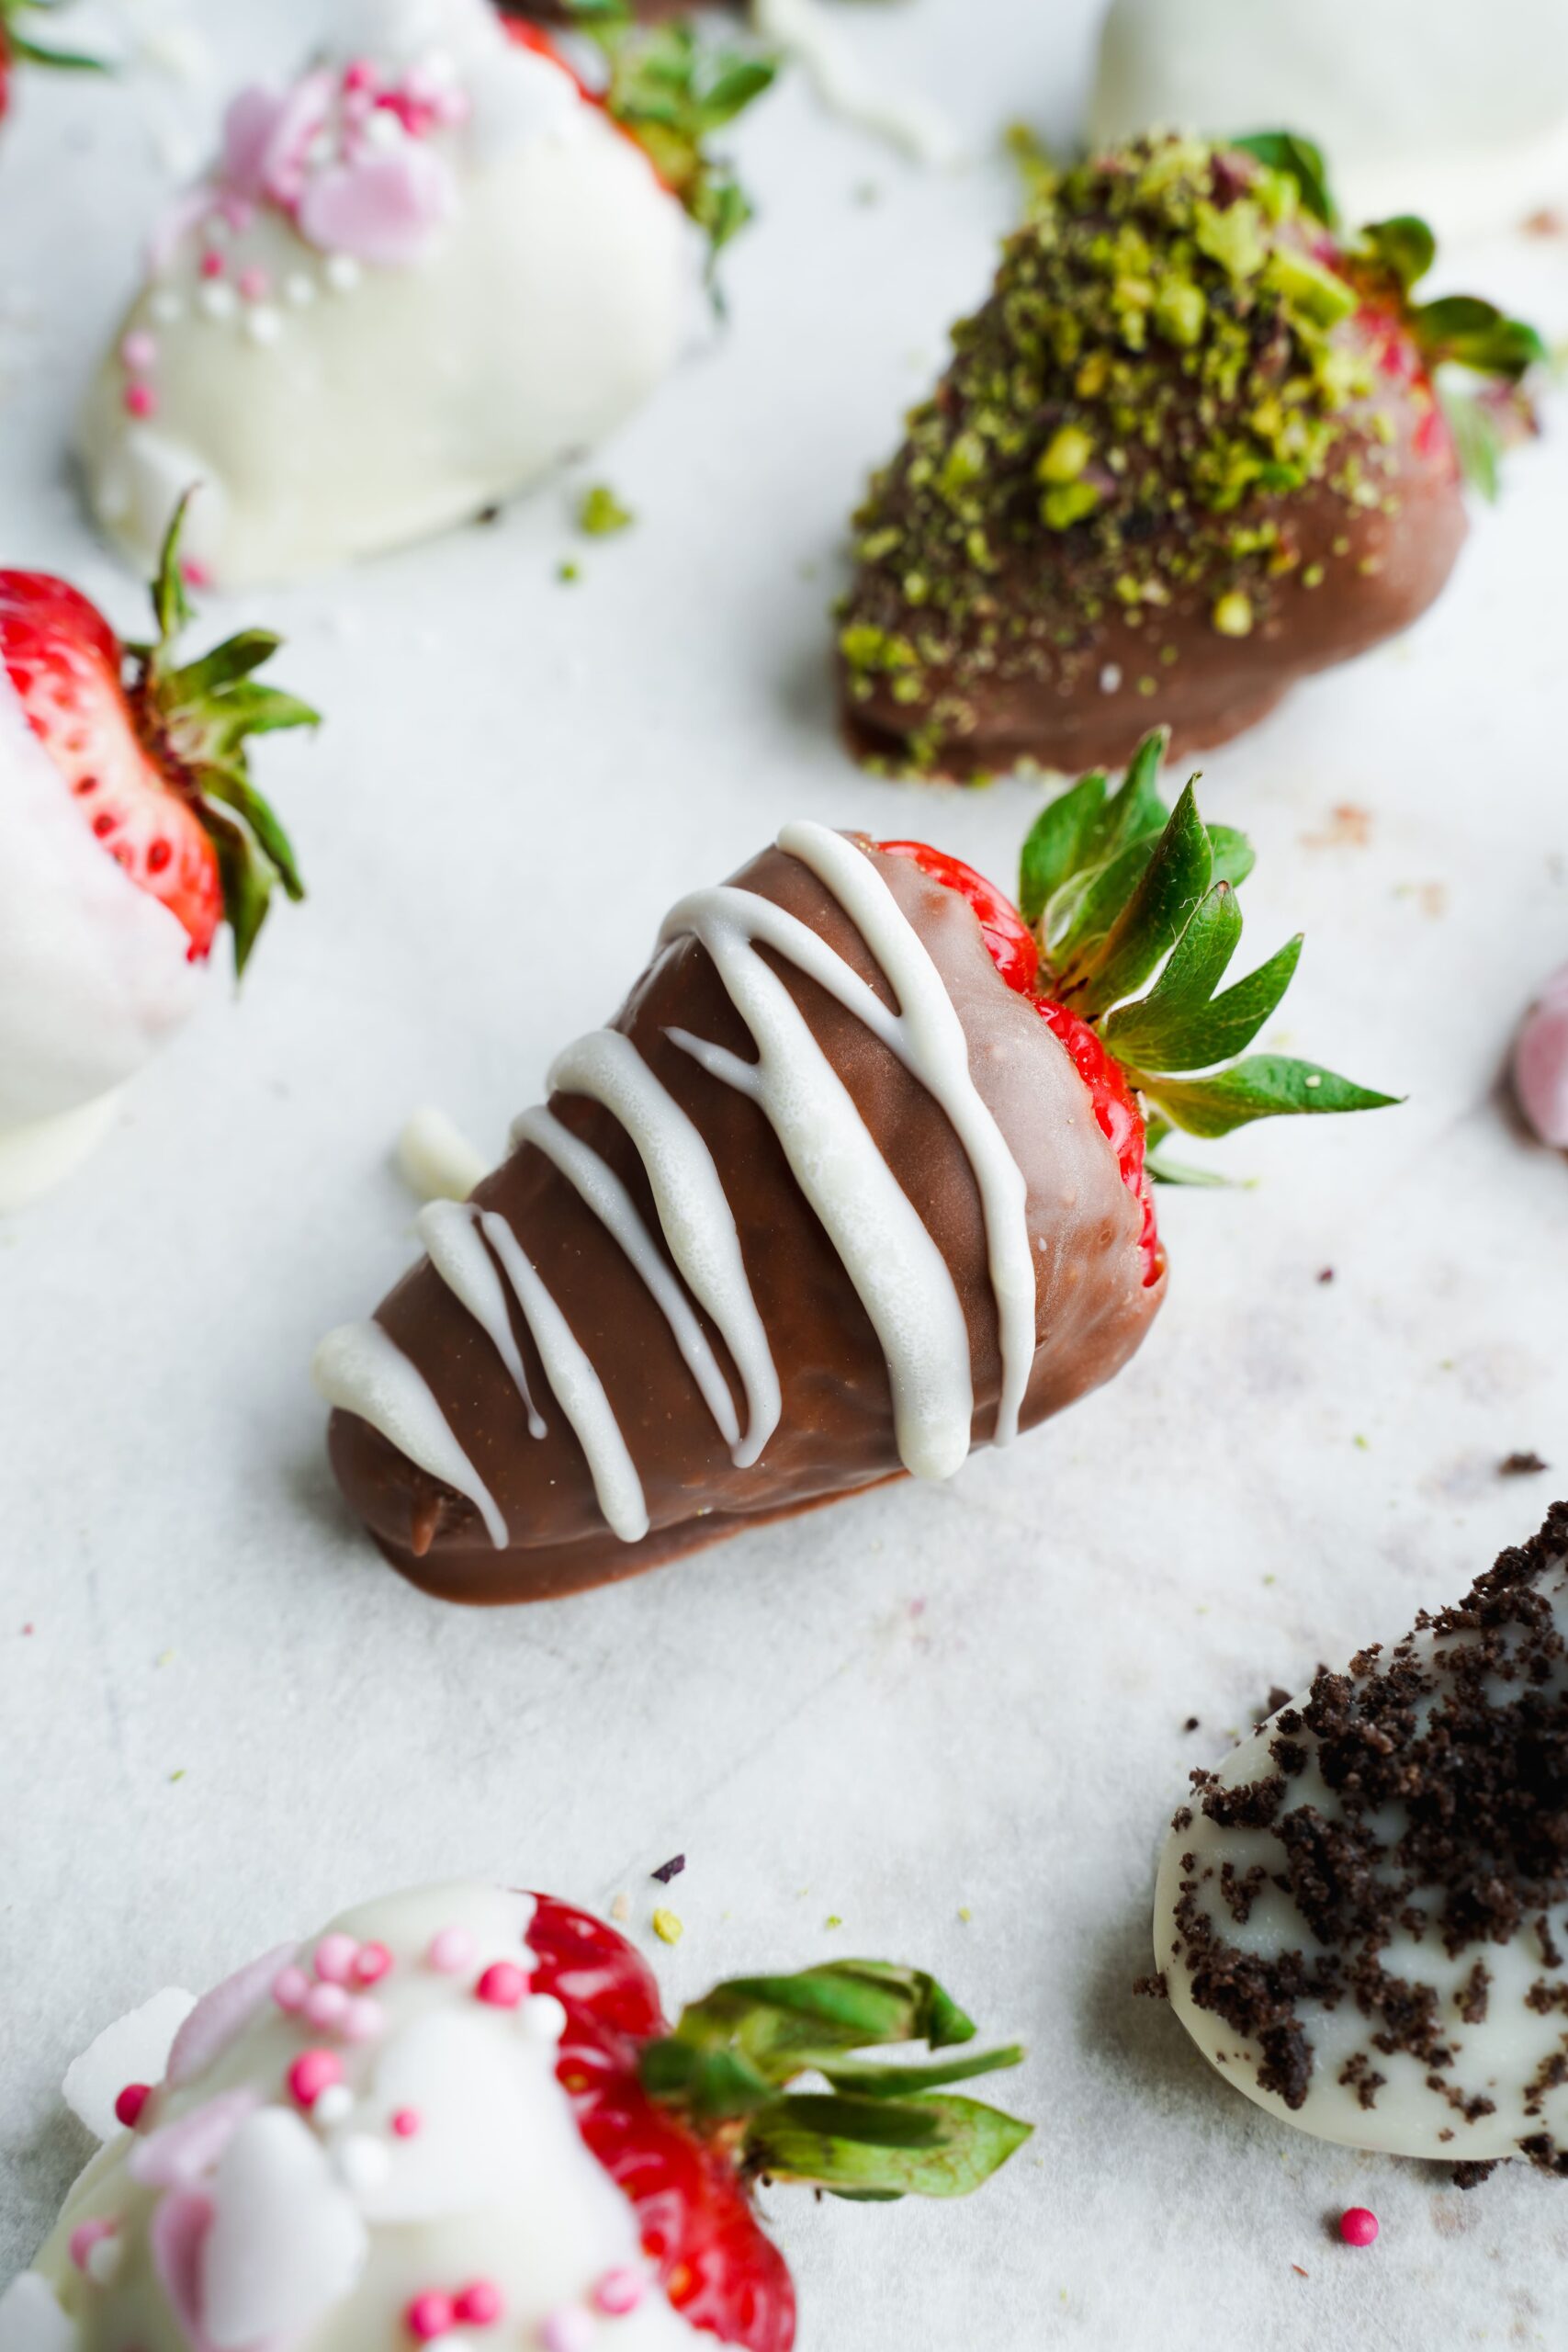 chocolate covered strawberries with white chocolate drizzle | cookingwithcassandra.com